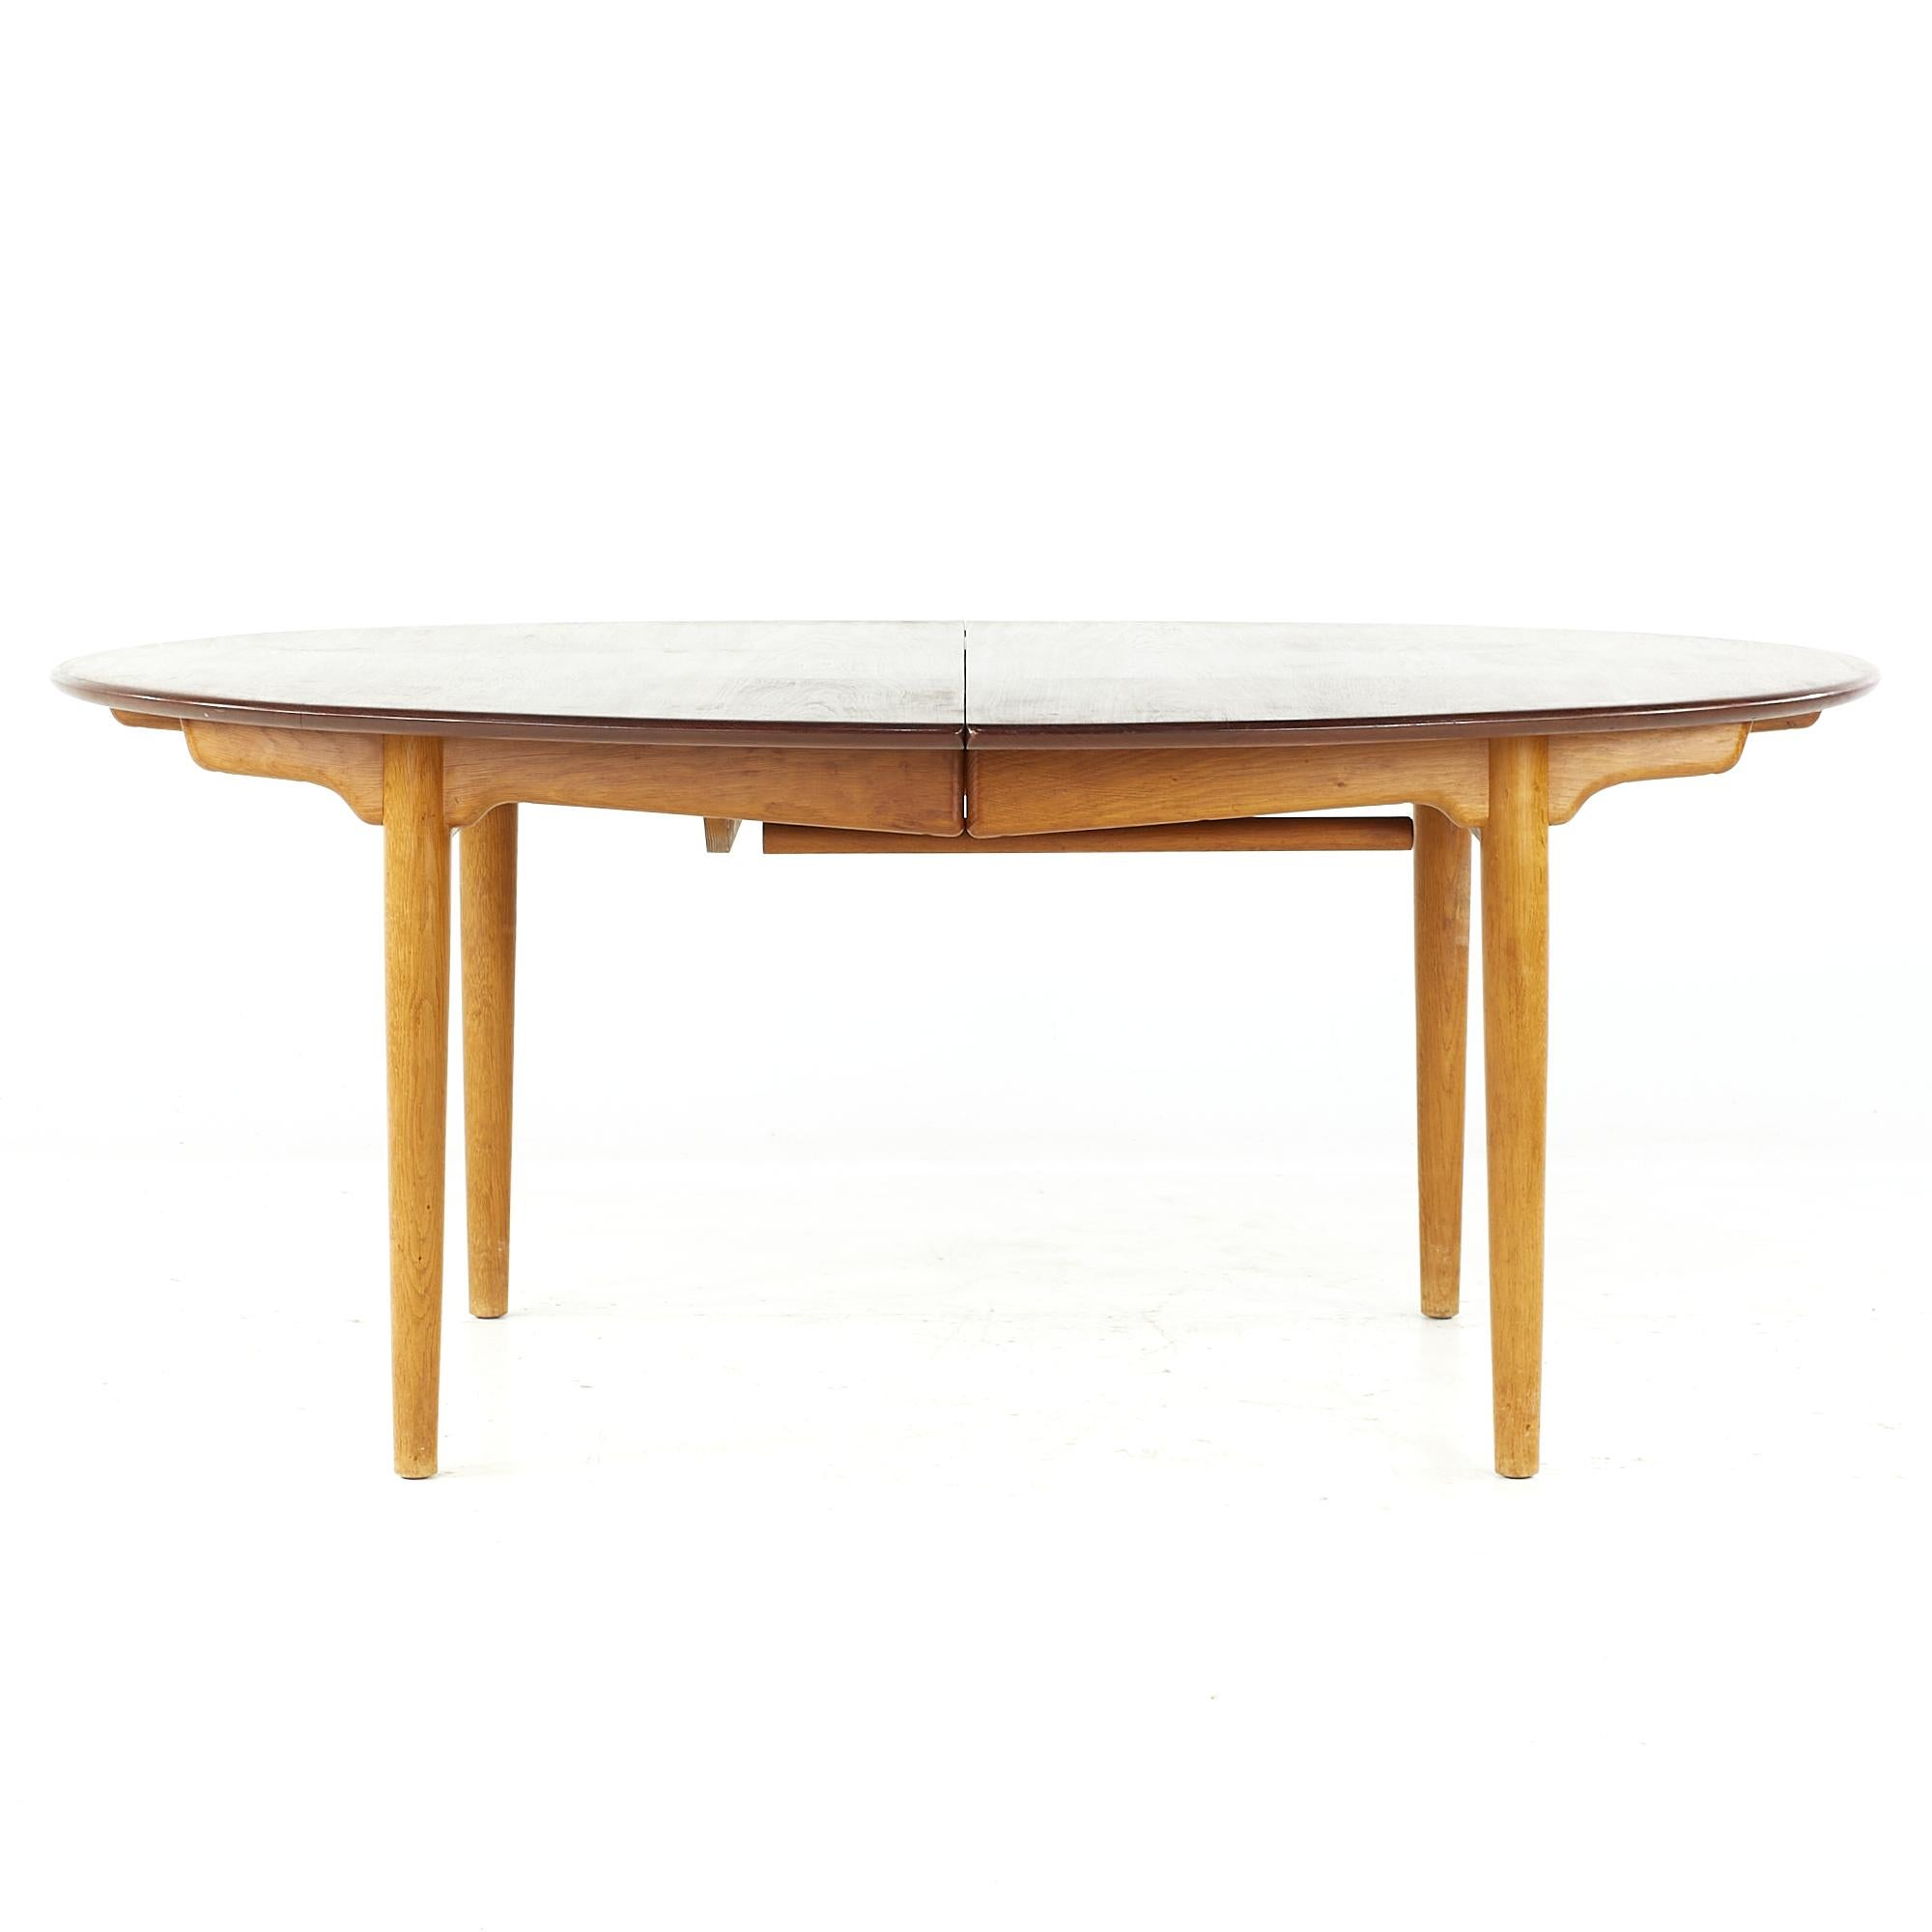 Early Original Hans Wegner for Johannes Hansen midcentury Model JH0567 Teak Dining Table

This table measures: 70.5 wide x 51.5 deep x 28 high, with a chair clearance of 27 inches, three leaves Measure 19.5 inches wide; one leaf measures 11.75